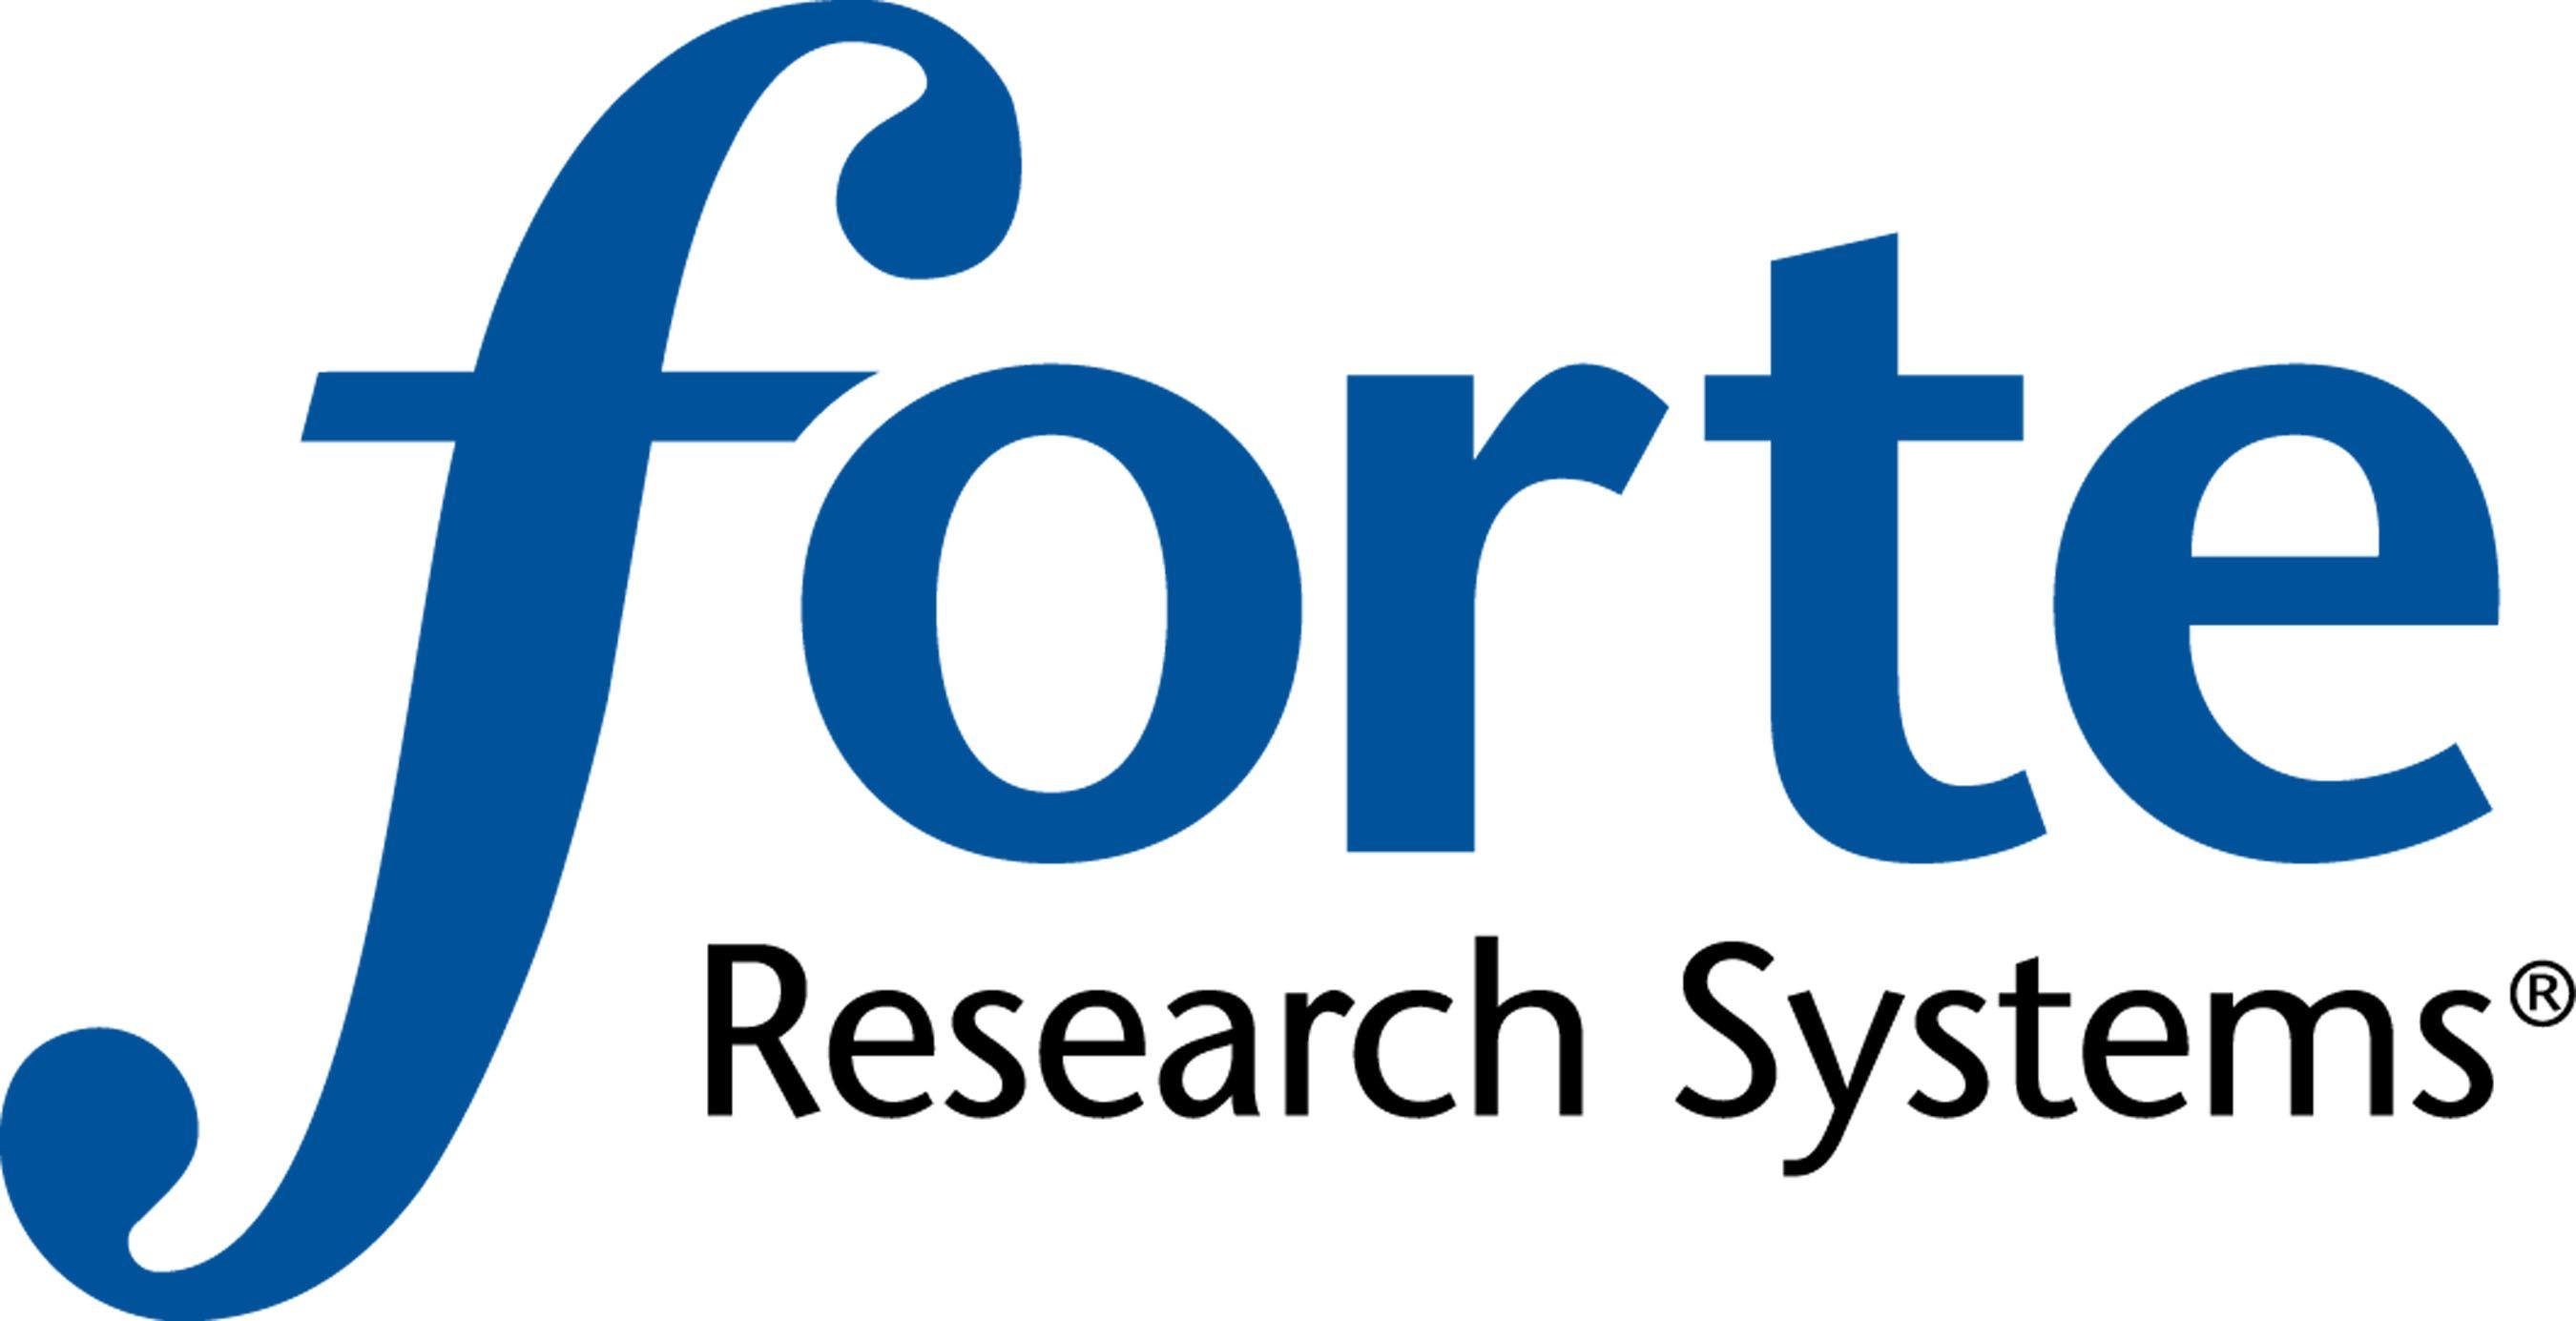 Forte Logo - FORTE RESEARCH SYSTEMS LOGO - Foundation for Madison Public Schools